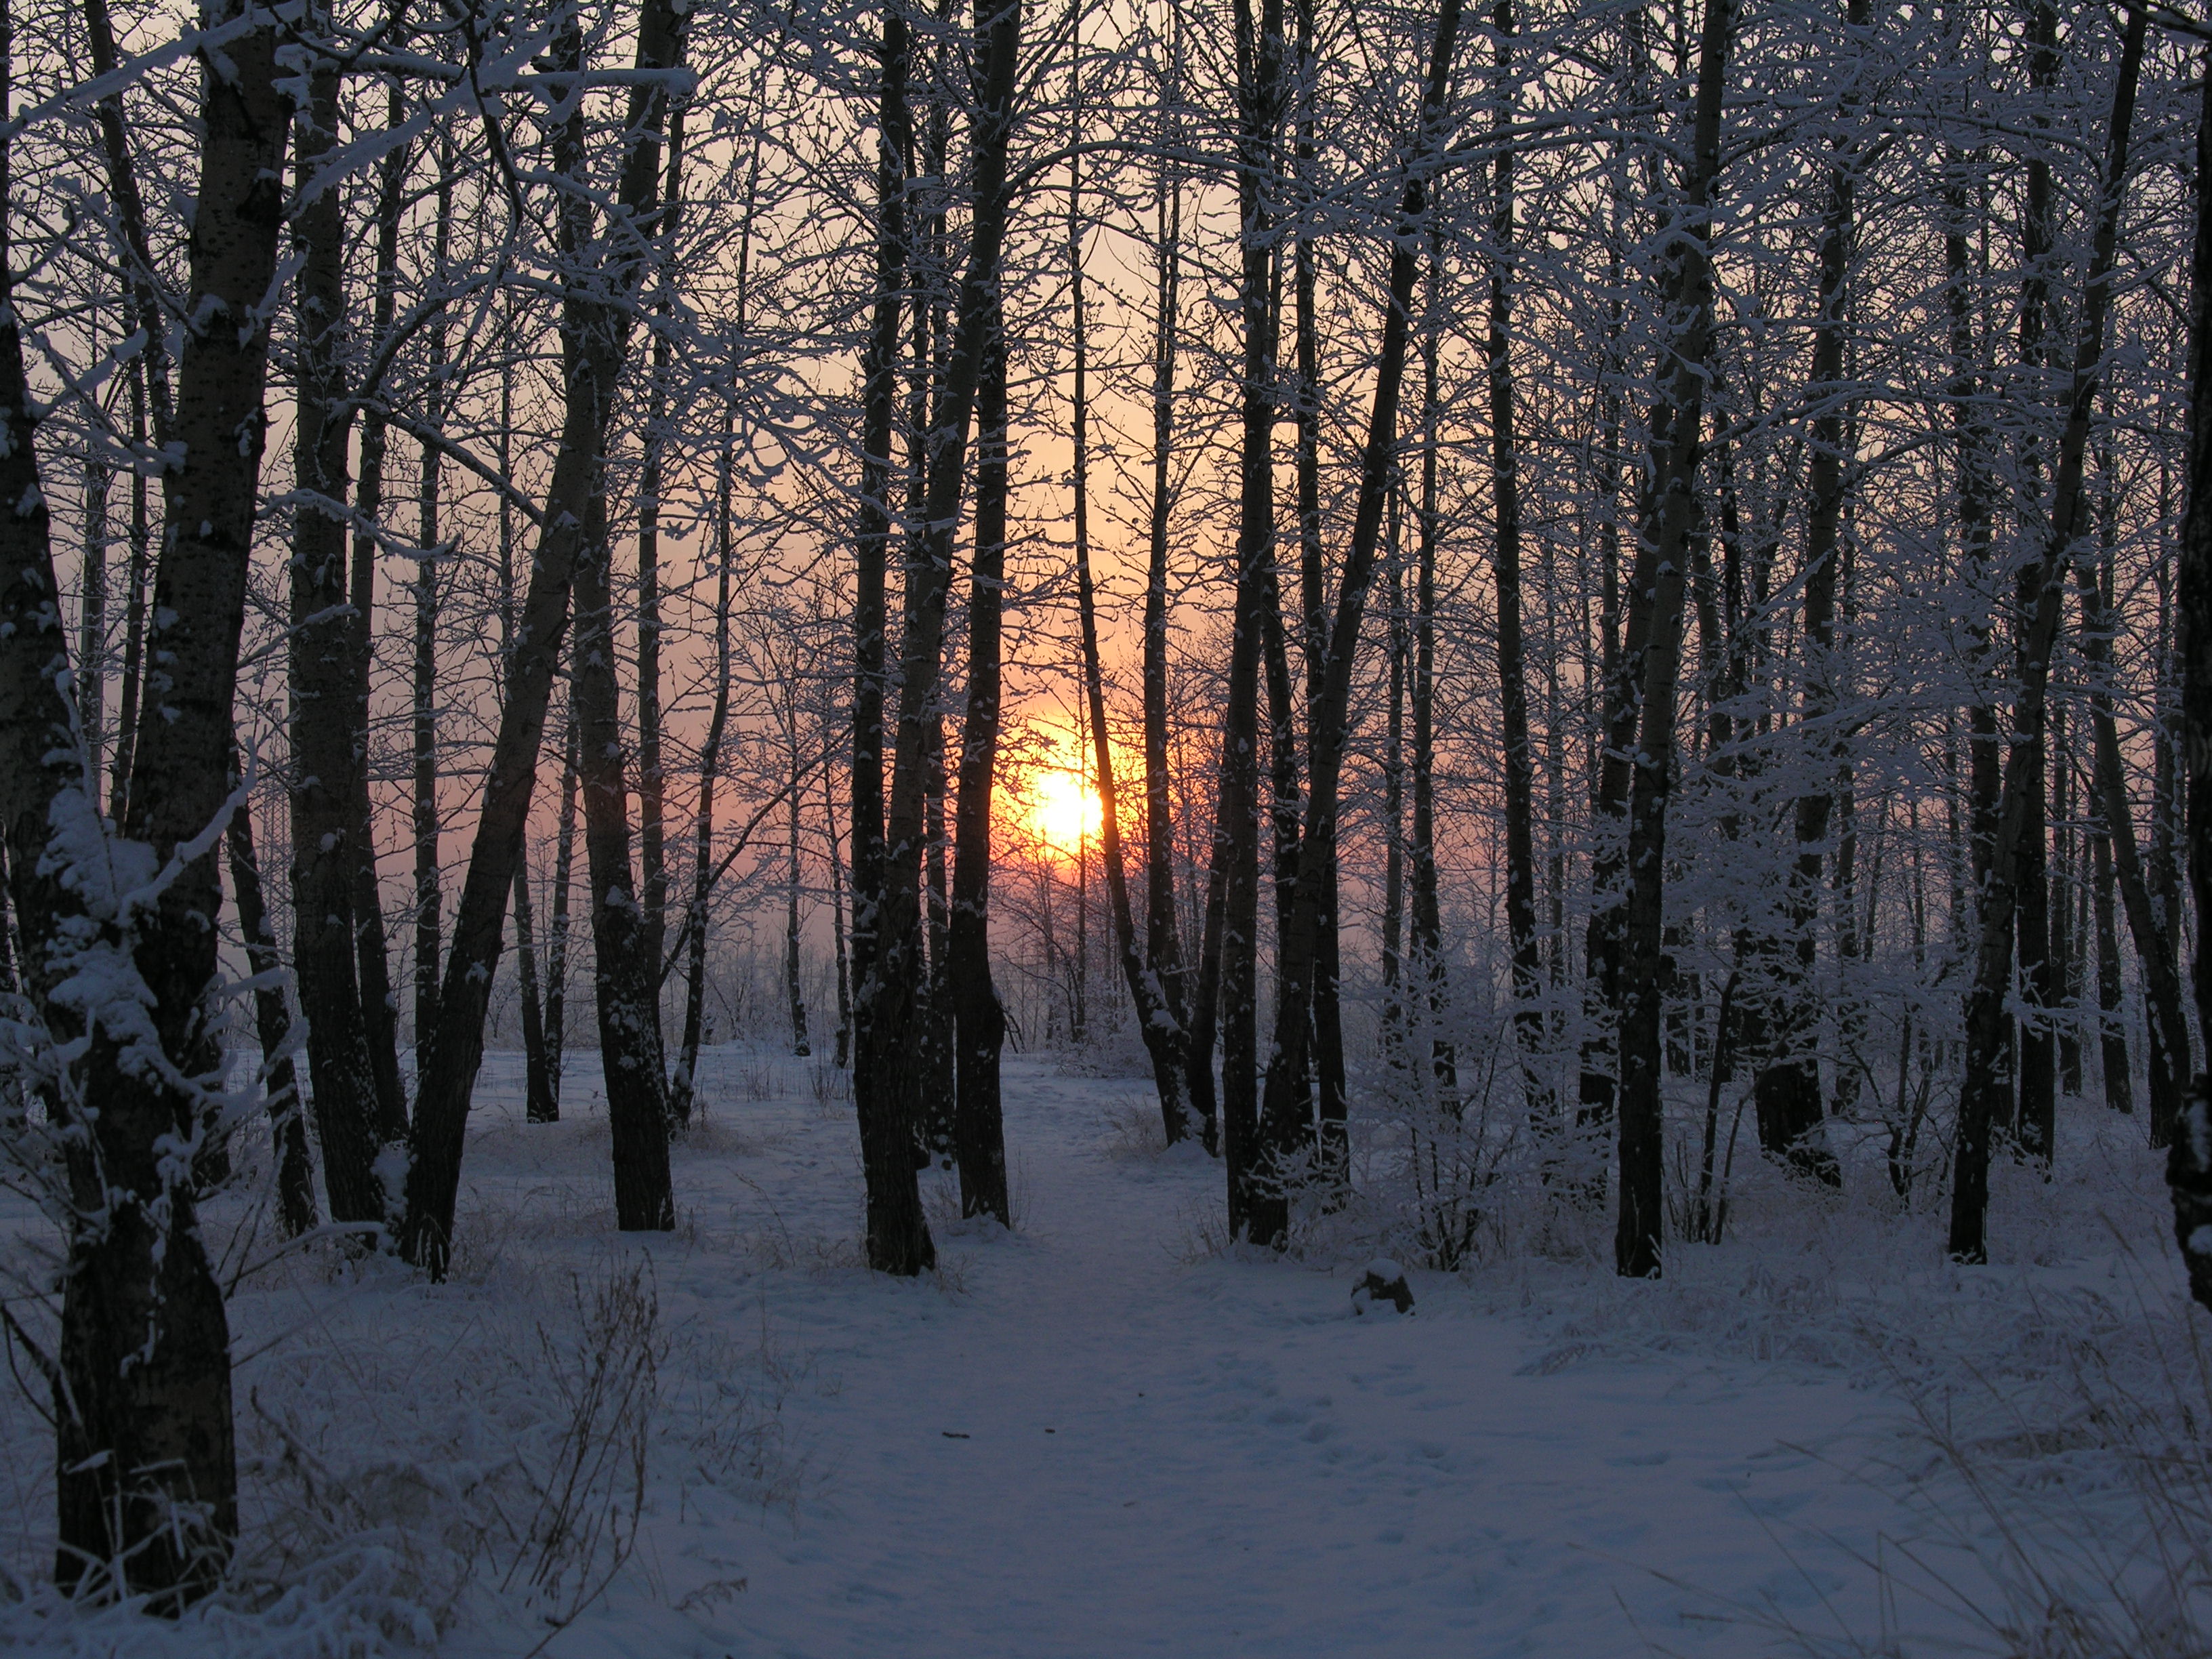 Winter sunset in the woods